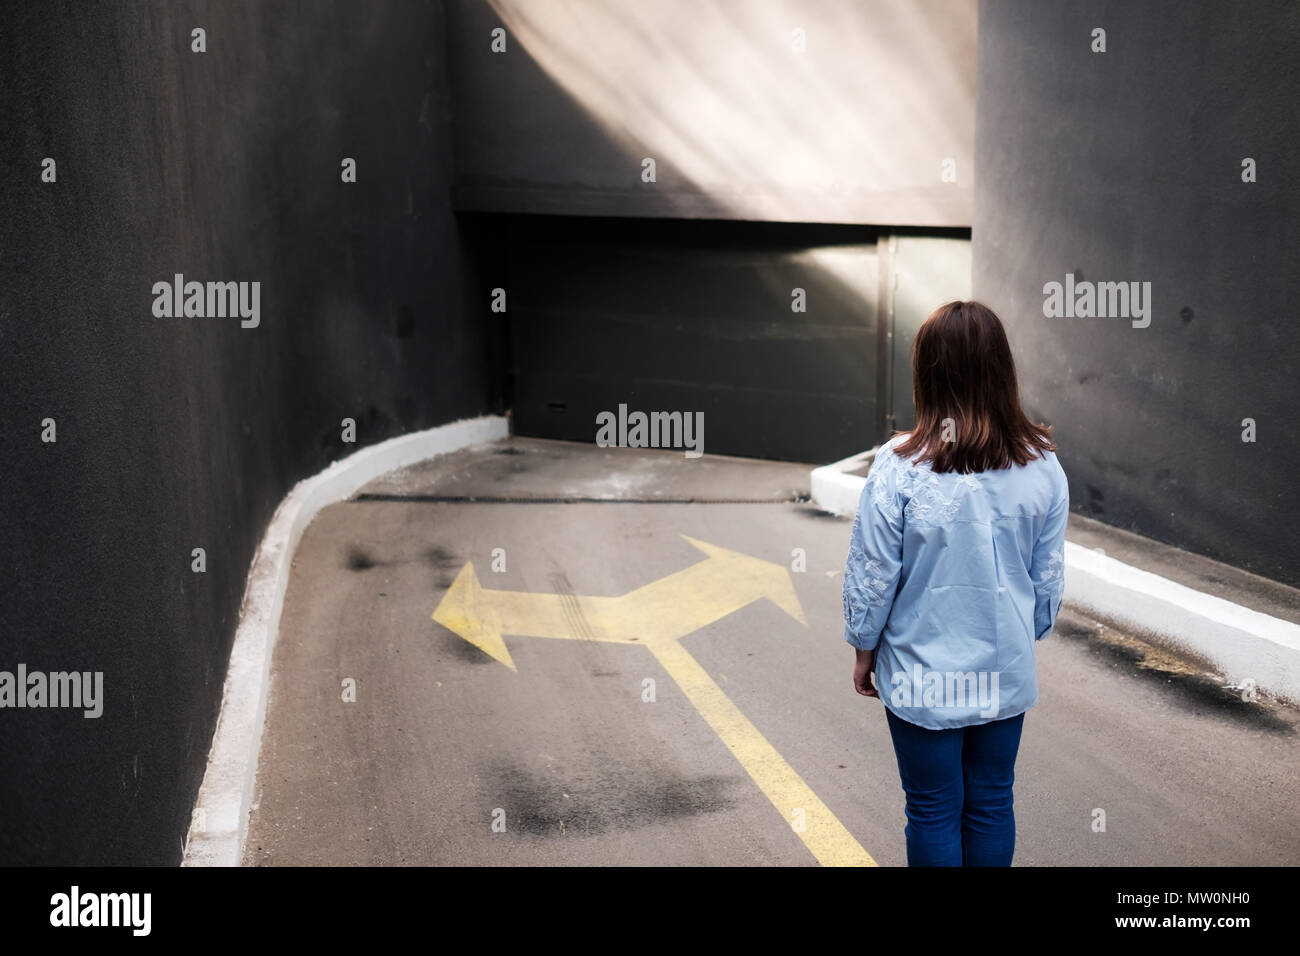 Firl standing near two arrows printed on grunge road, making decision Stock Photo